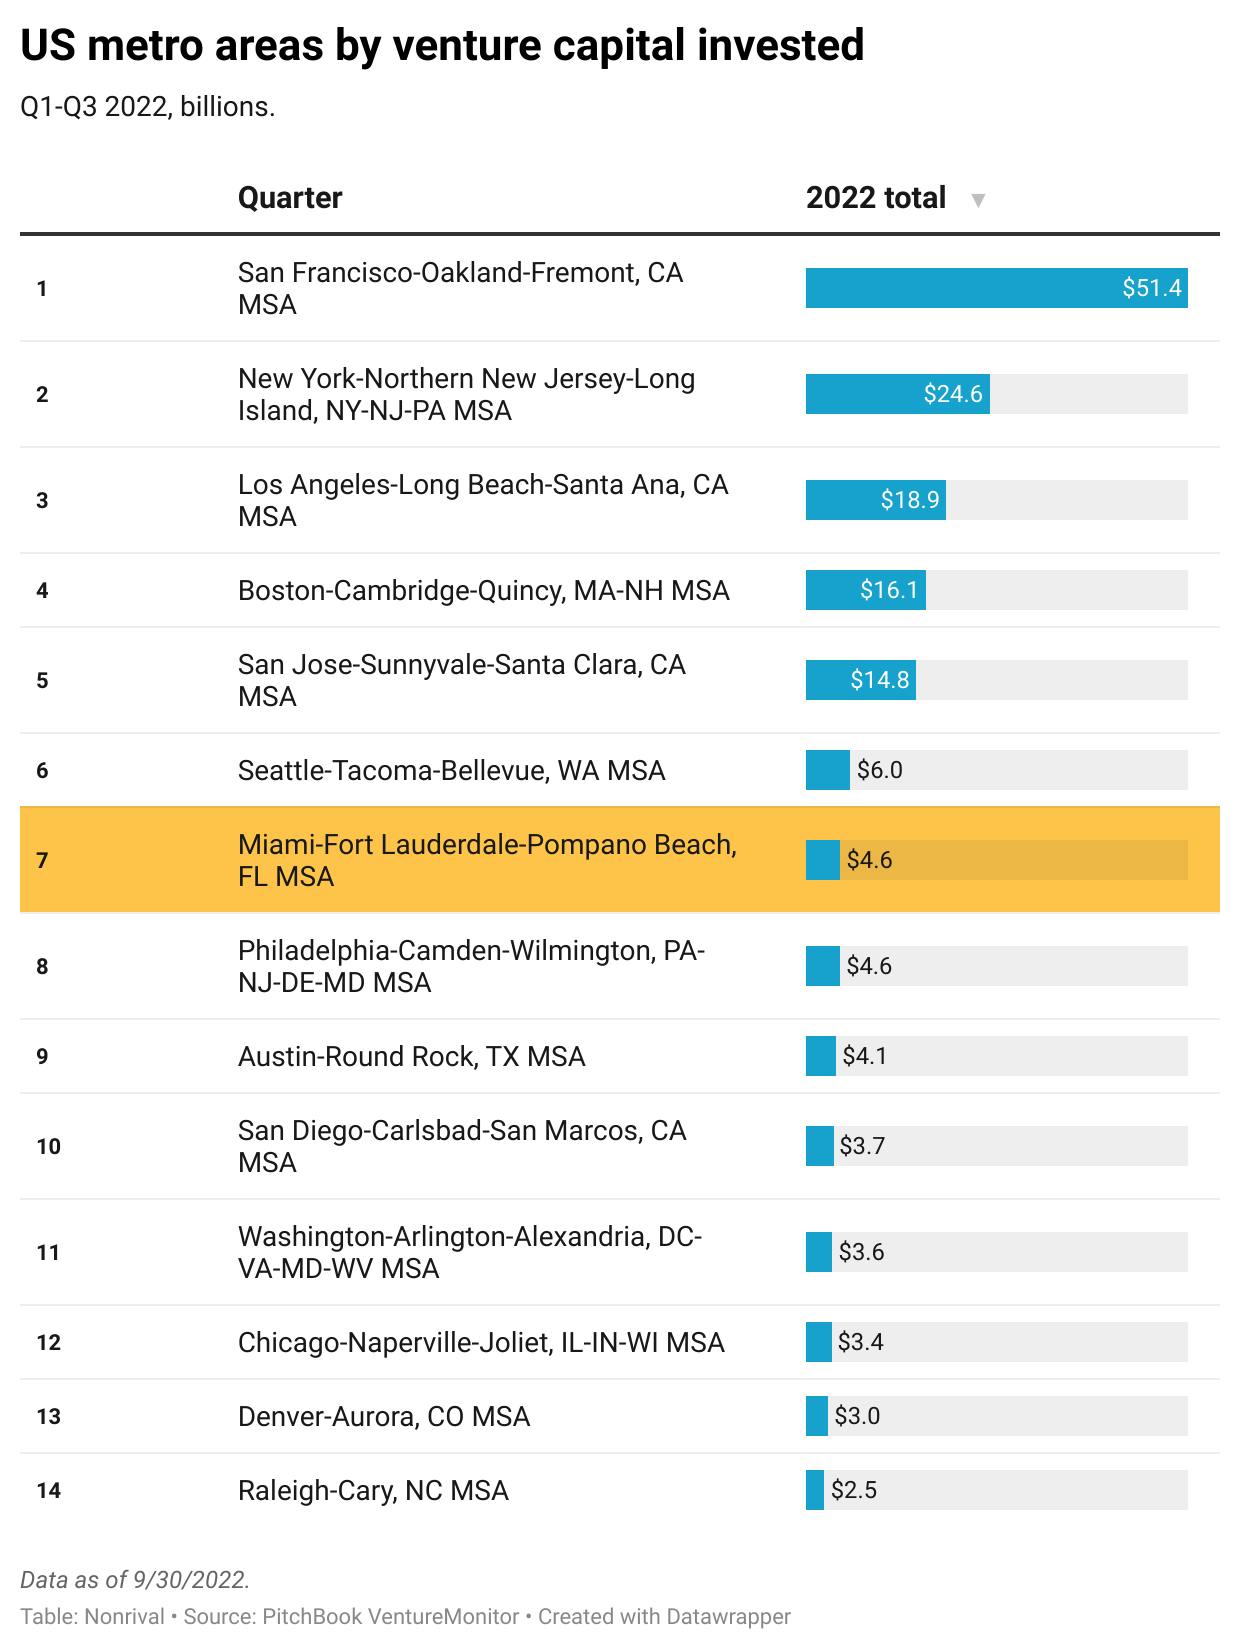 Miami currently ranks 7th in VC invested among US cities, behind Seattle and just barely above Philadelphia.